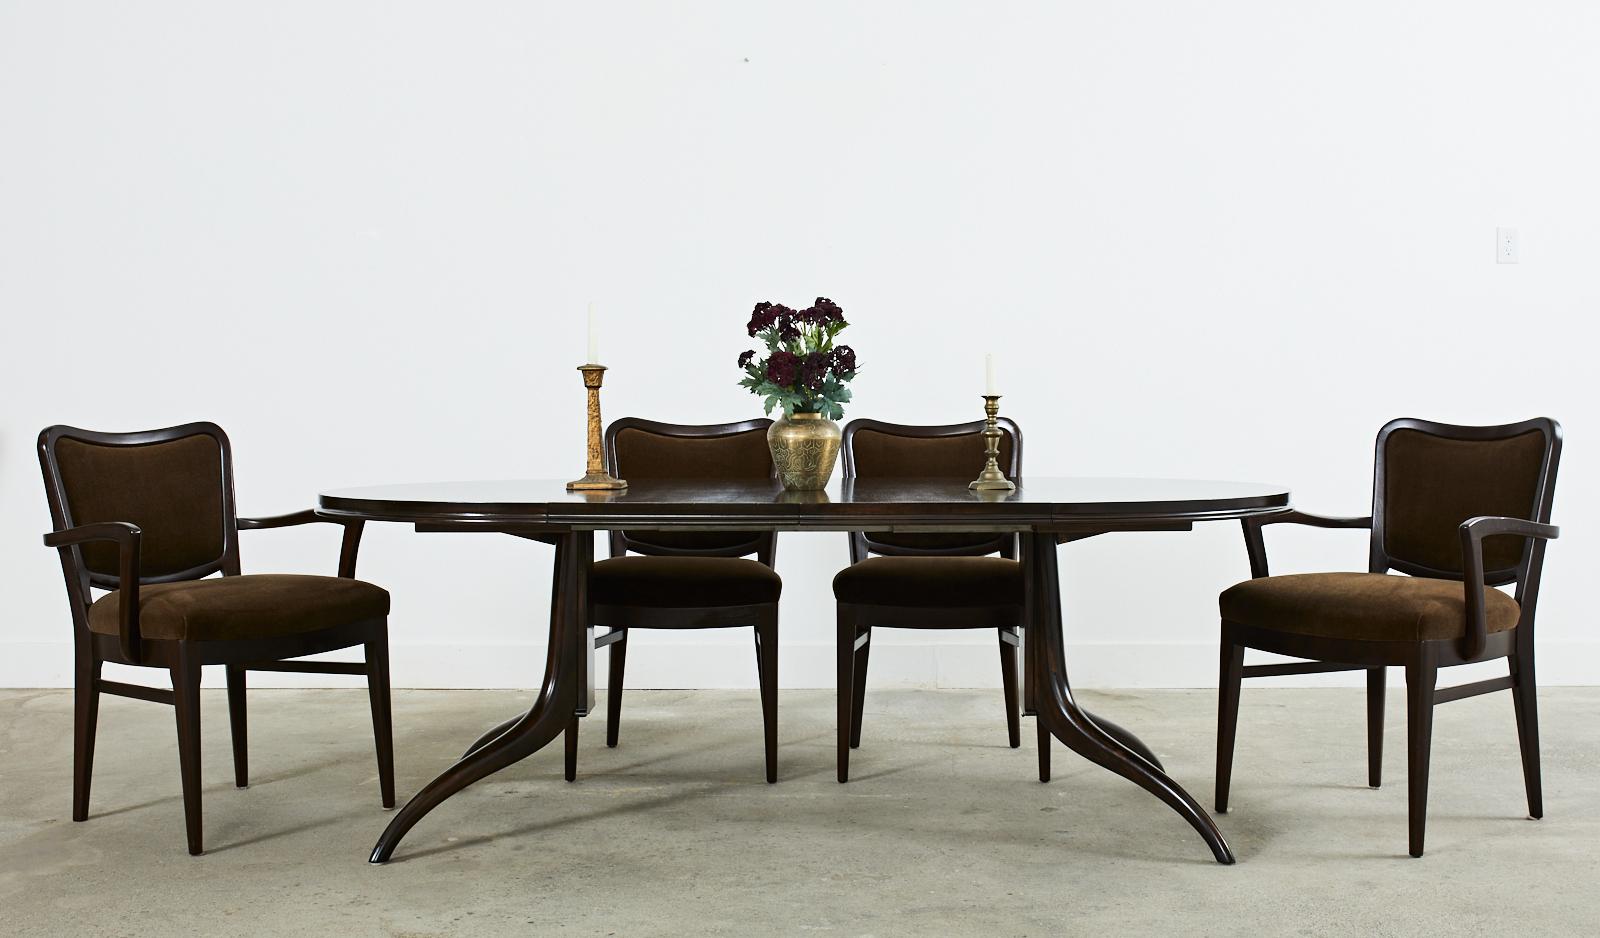 Elegant Mid-Century Modern dining table designed by T.H. Robsjohn-Gibbings for Widdicomb Furniture Co. The table features two 18 inch leaves that extend the top from 44.5 inches round to an oval or race track form measuring 80.5 inches wide. Crafted